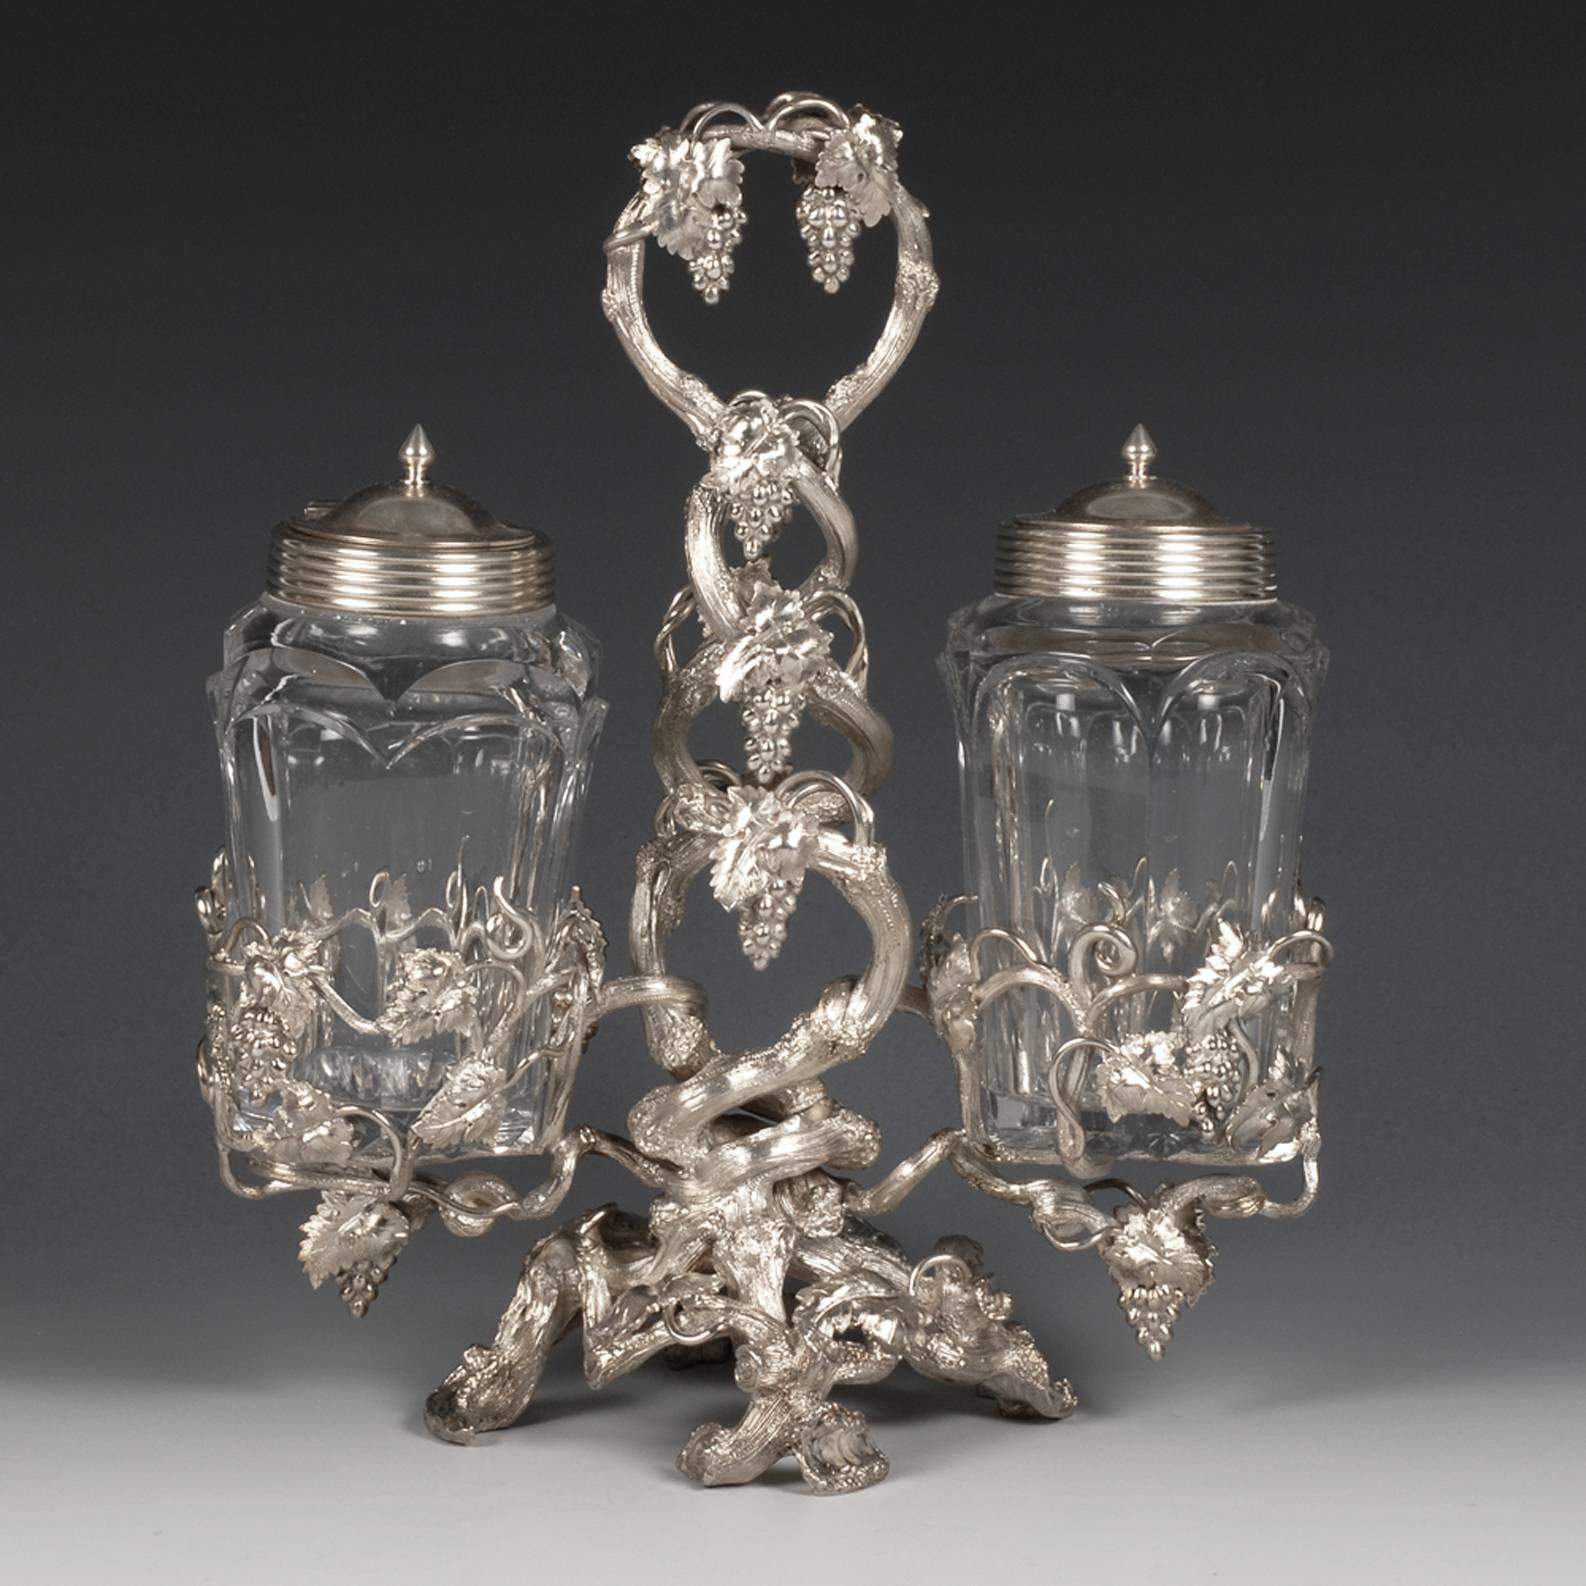 A Russian silver-mounted cut glass condiment set, Saint Petersburg, circa 1852. The mounts naturalistically cast and chased as entwined grapevines, on four feet shaped as leafy vines, with tendrils and bunches of grapes woven throughout and forming